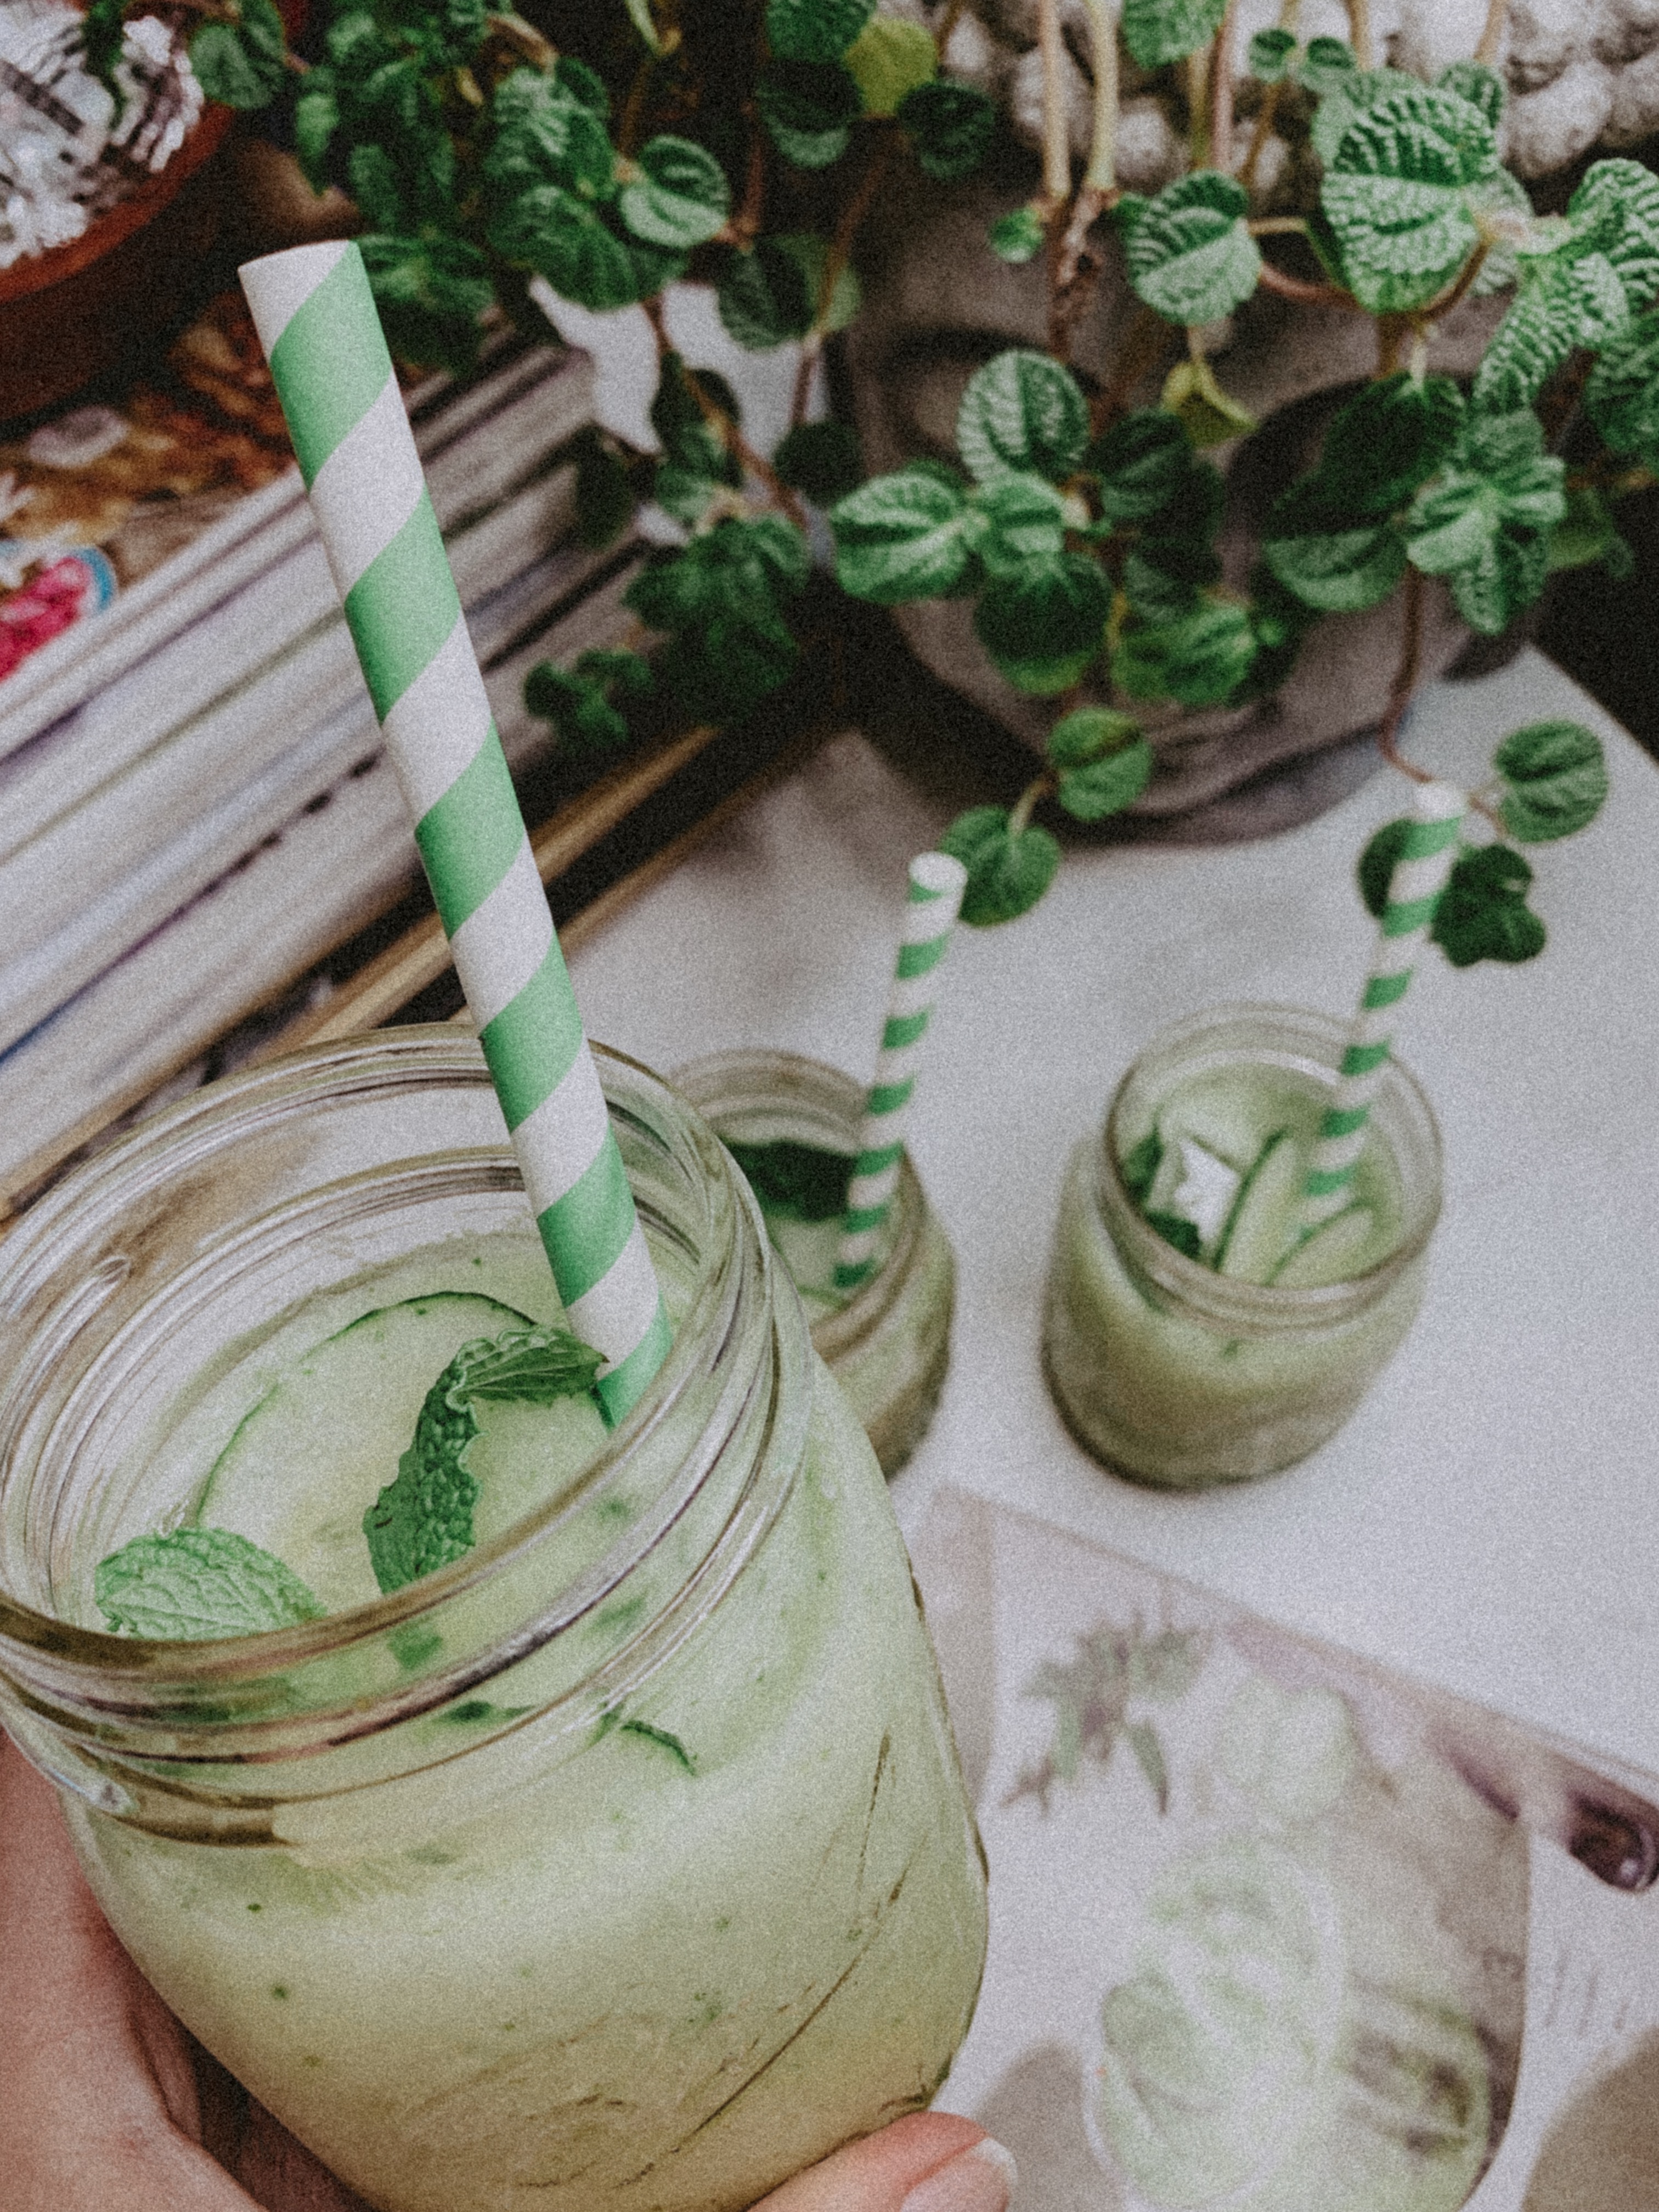 Close Up - Two Summer Mocktails That Will Leave You Feeling Refreshed- Honeydew Cucumber Mint Mocktail - Simply by Simone #cheers #cocktails #mocktails #drinks #summer #refreshed #blogger #lifestyle #lifestyleblog #lifestyleblogger #cocktail #mocktail #honeydew #paperstraws #decor #flowers #cocktailcourier